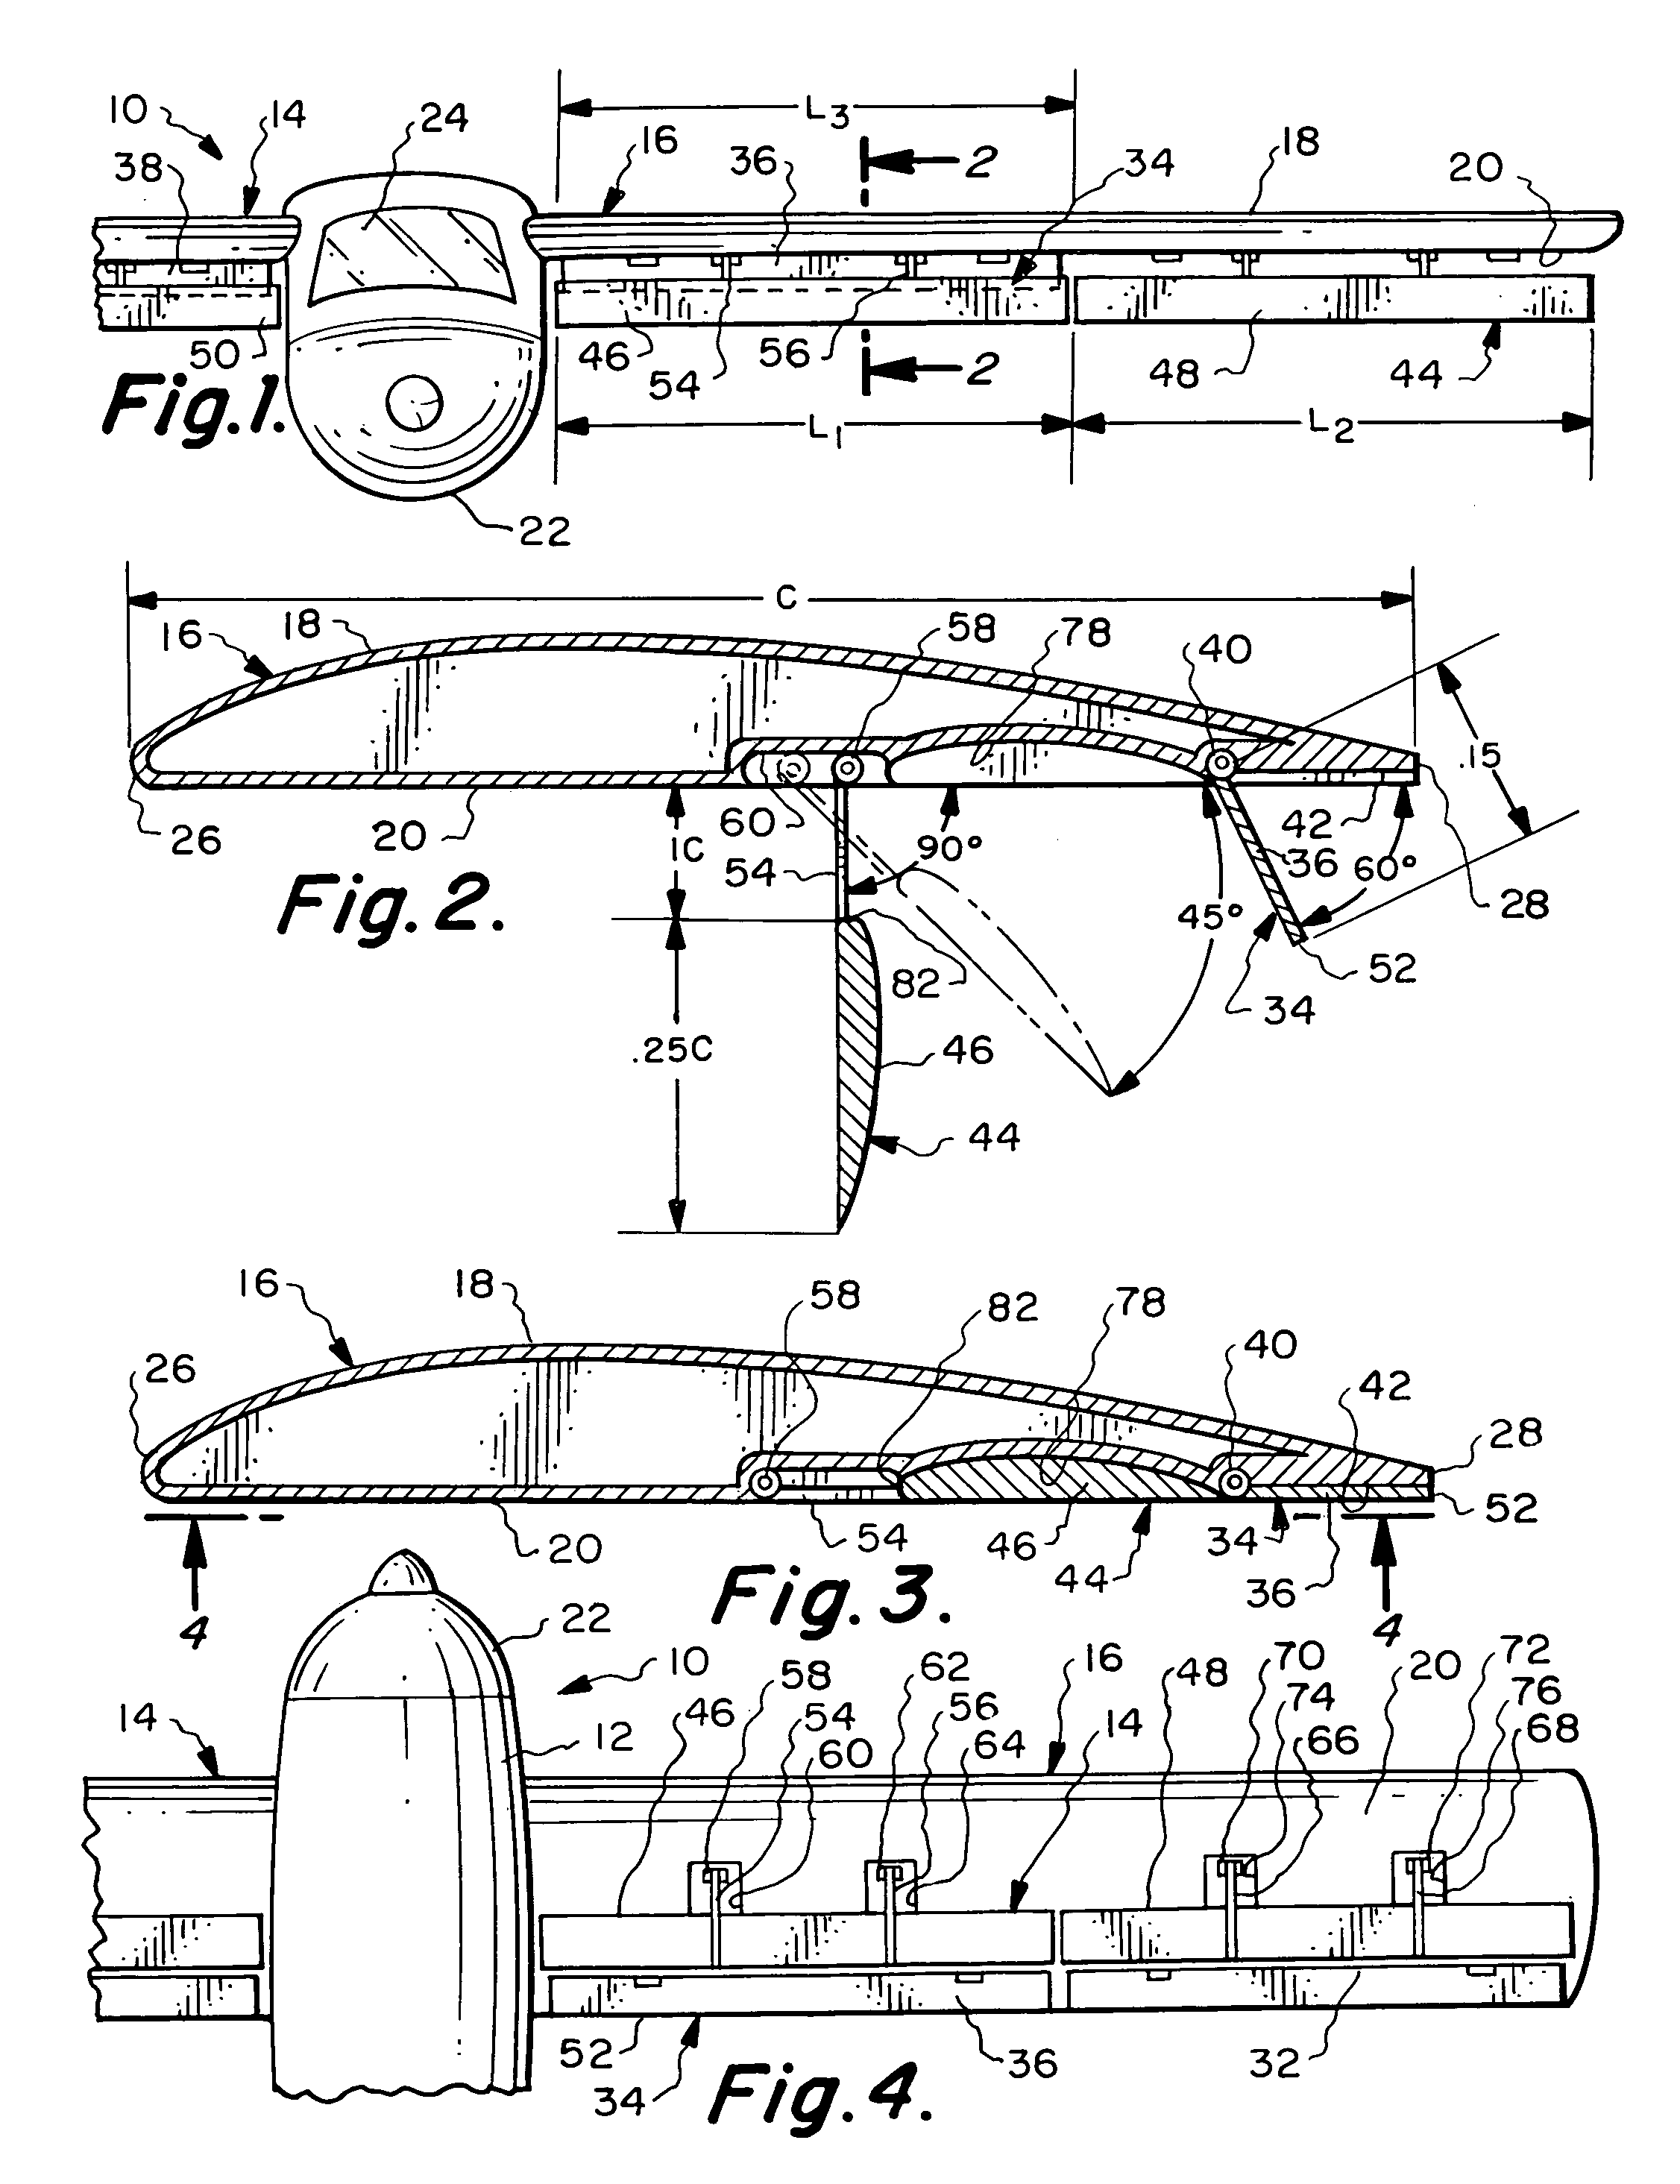 Auxiliary wing and flap assembly for an aircraft